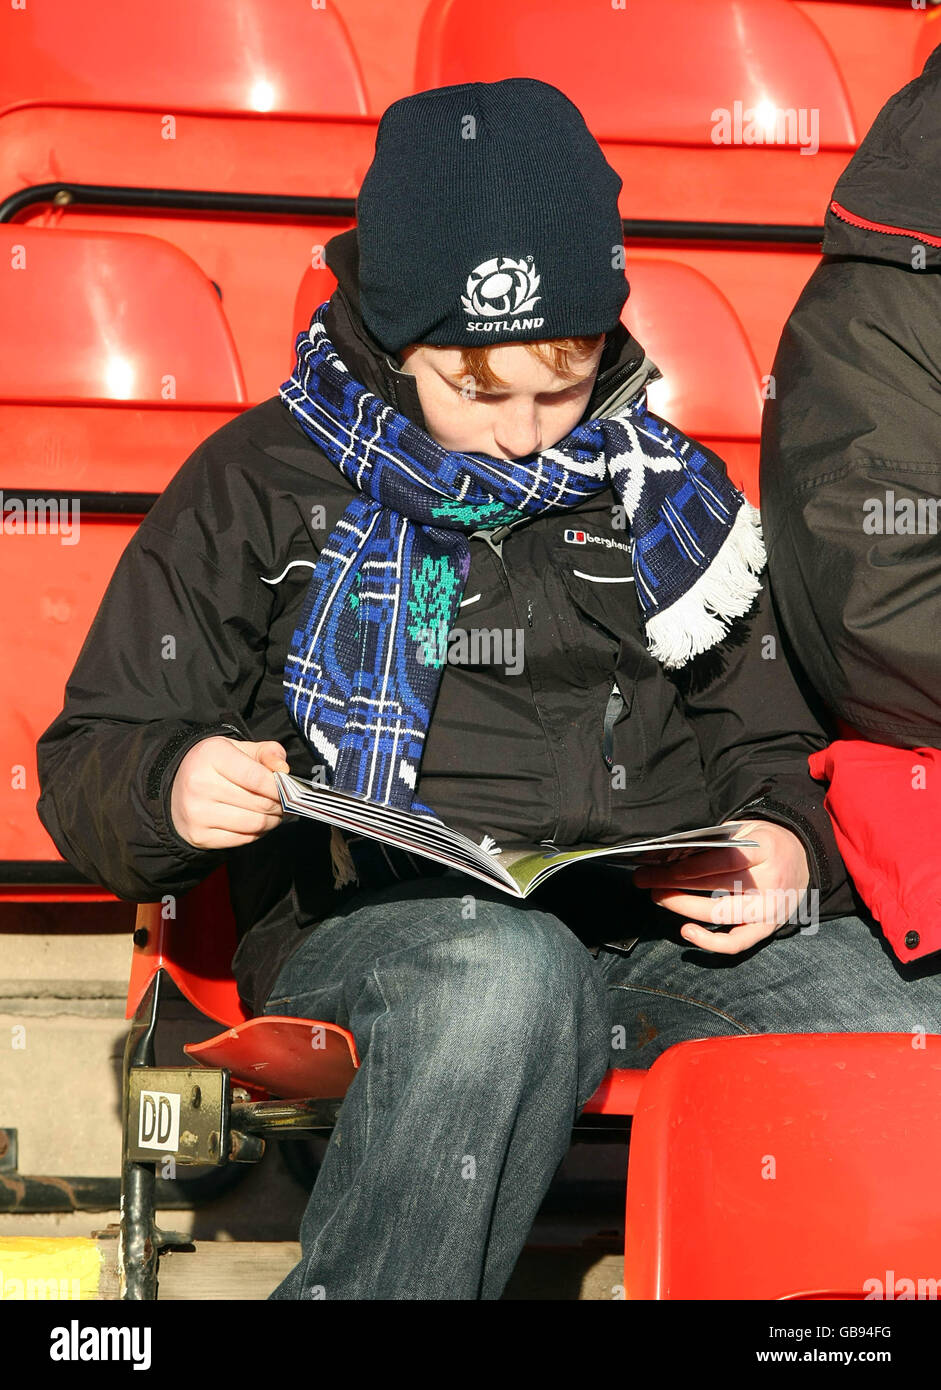 Scotland fan during the Bank of Scotland Corporate Autumn Test match at Pittodrie Stadium, Aberdeen. Stock Photo